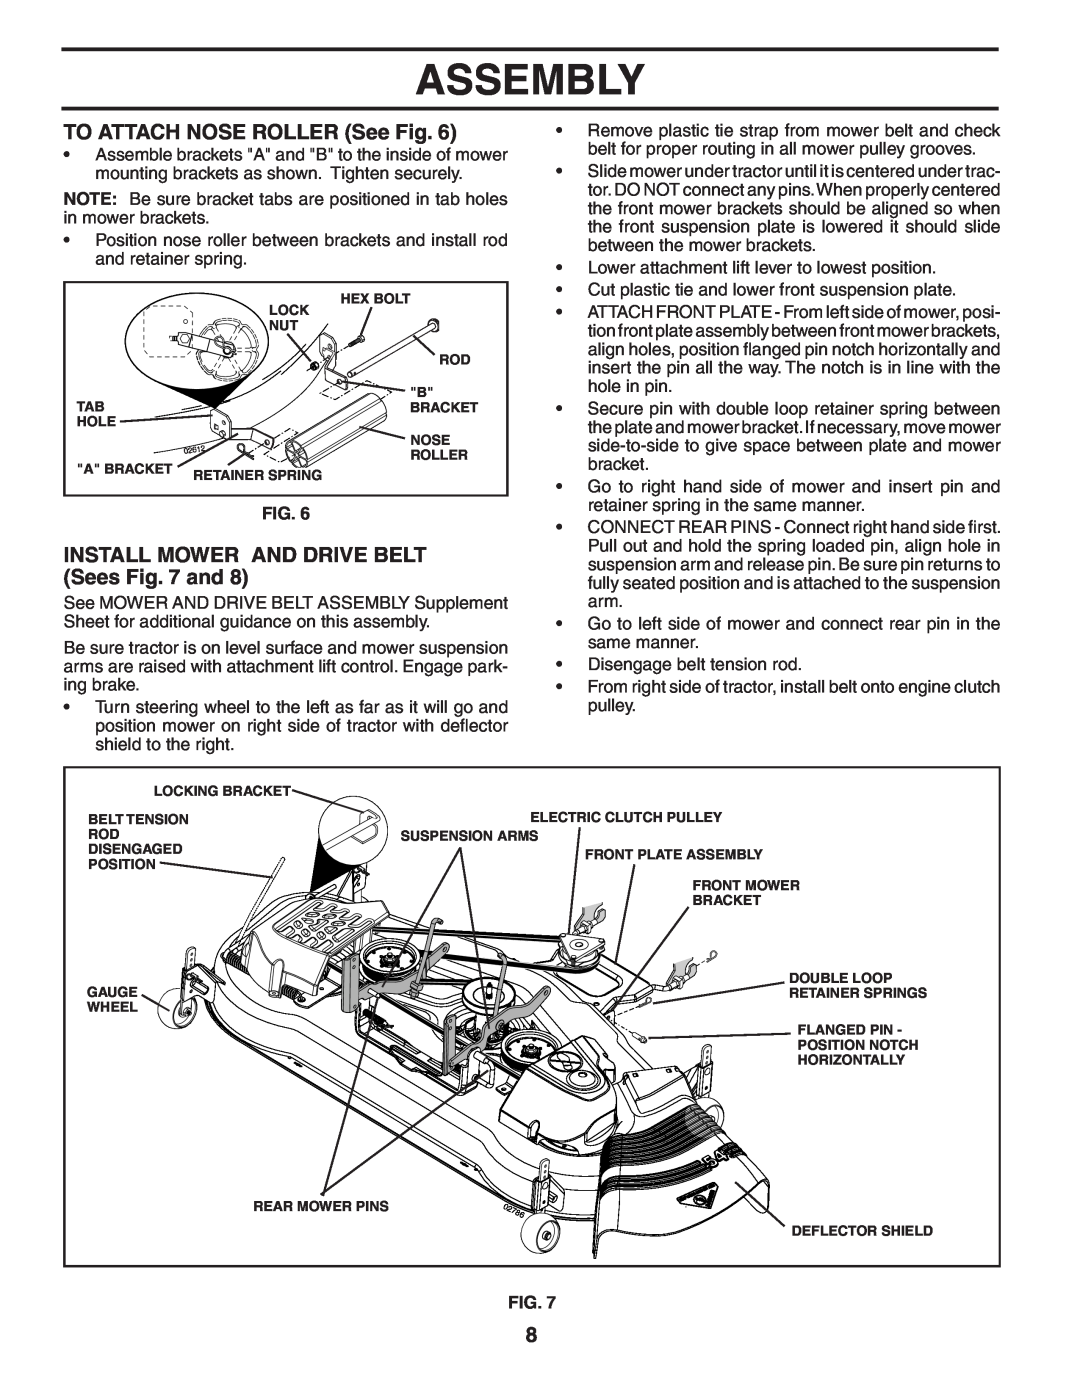 Poulan PKGTH2554 manual TO ATTACH NOSE ROLLER See Fig, INSTALL MOWER AND DRIVE BELT Sees and, Assembly 